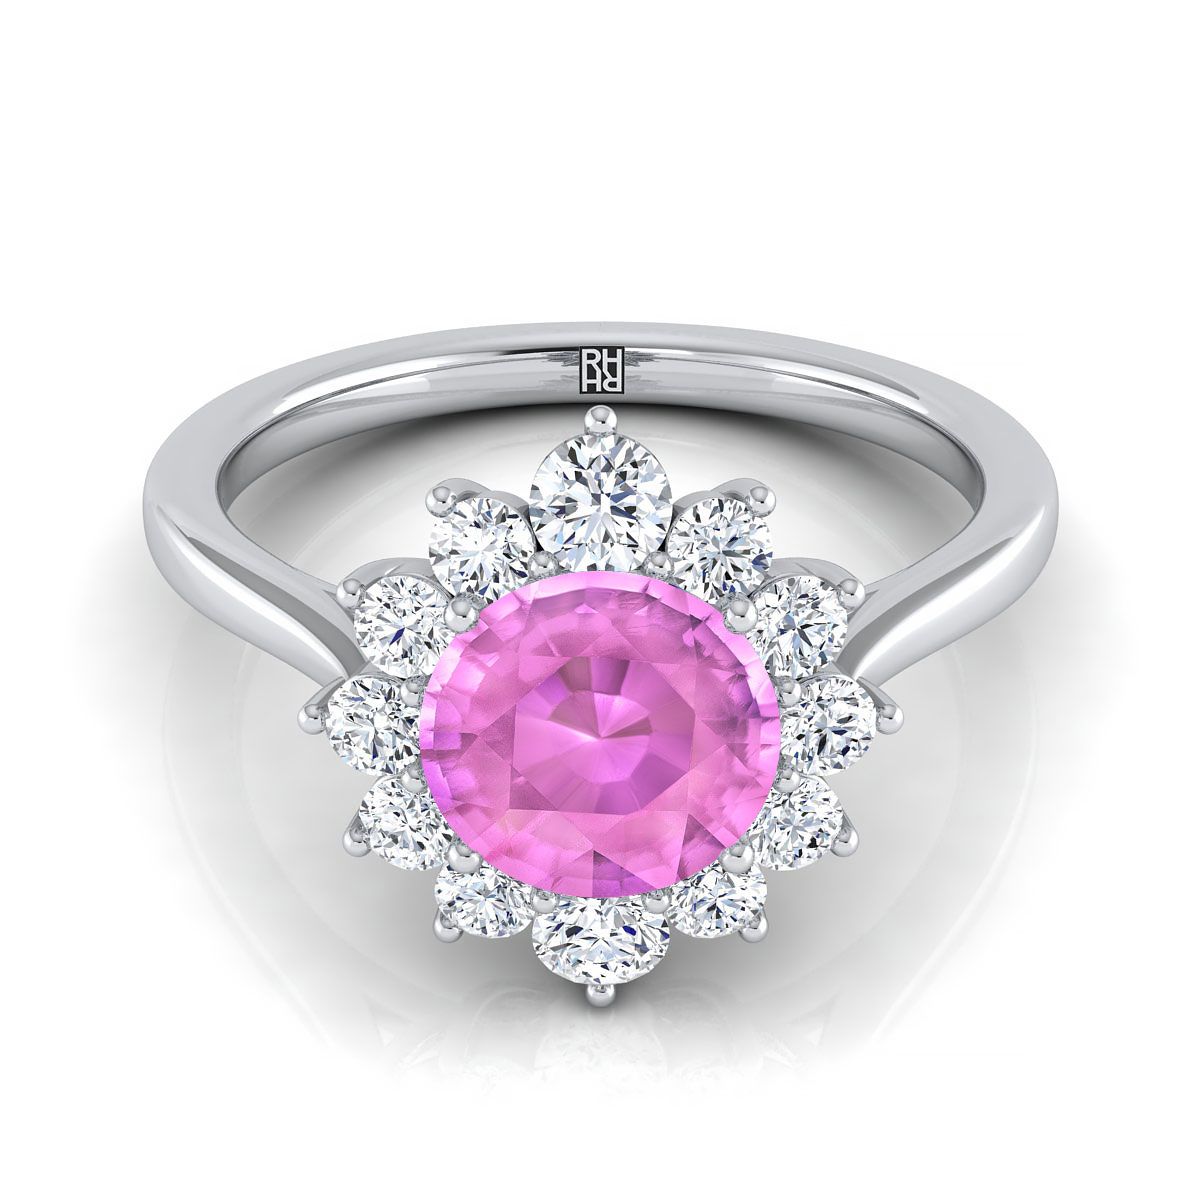 18K White Gold Round Brilliant Pink Sapphire Floral Diamond Halo Engagement Ring -1/2ctw